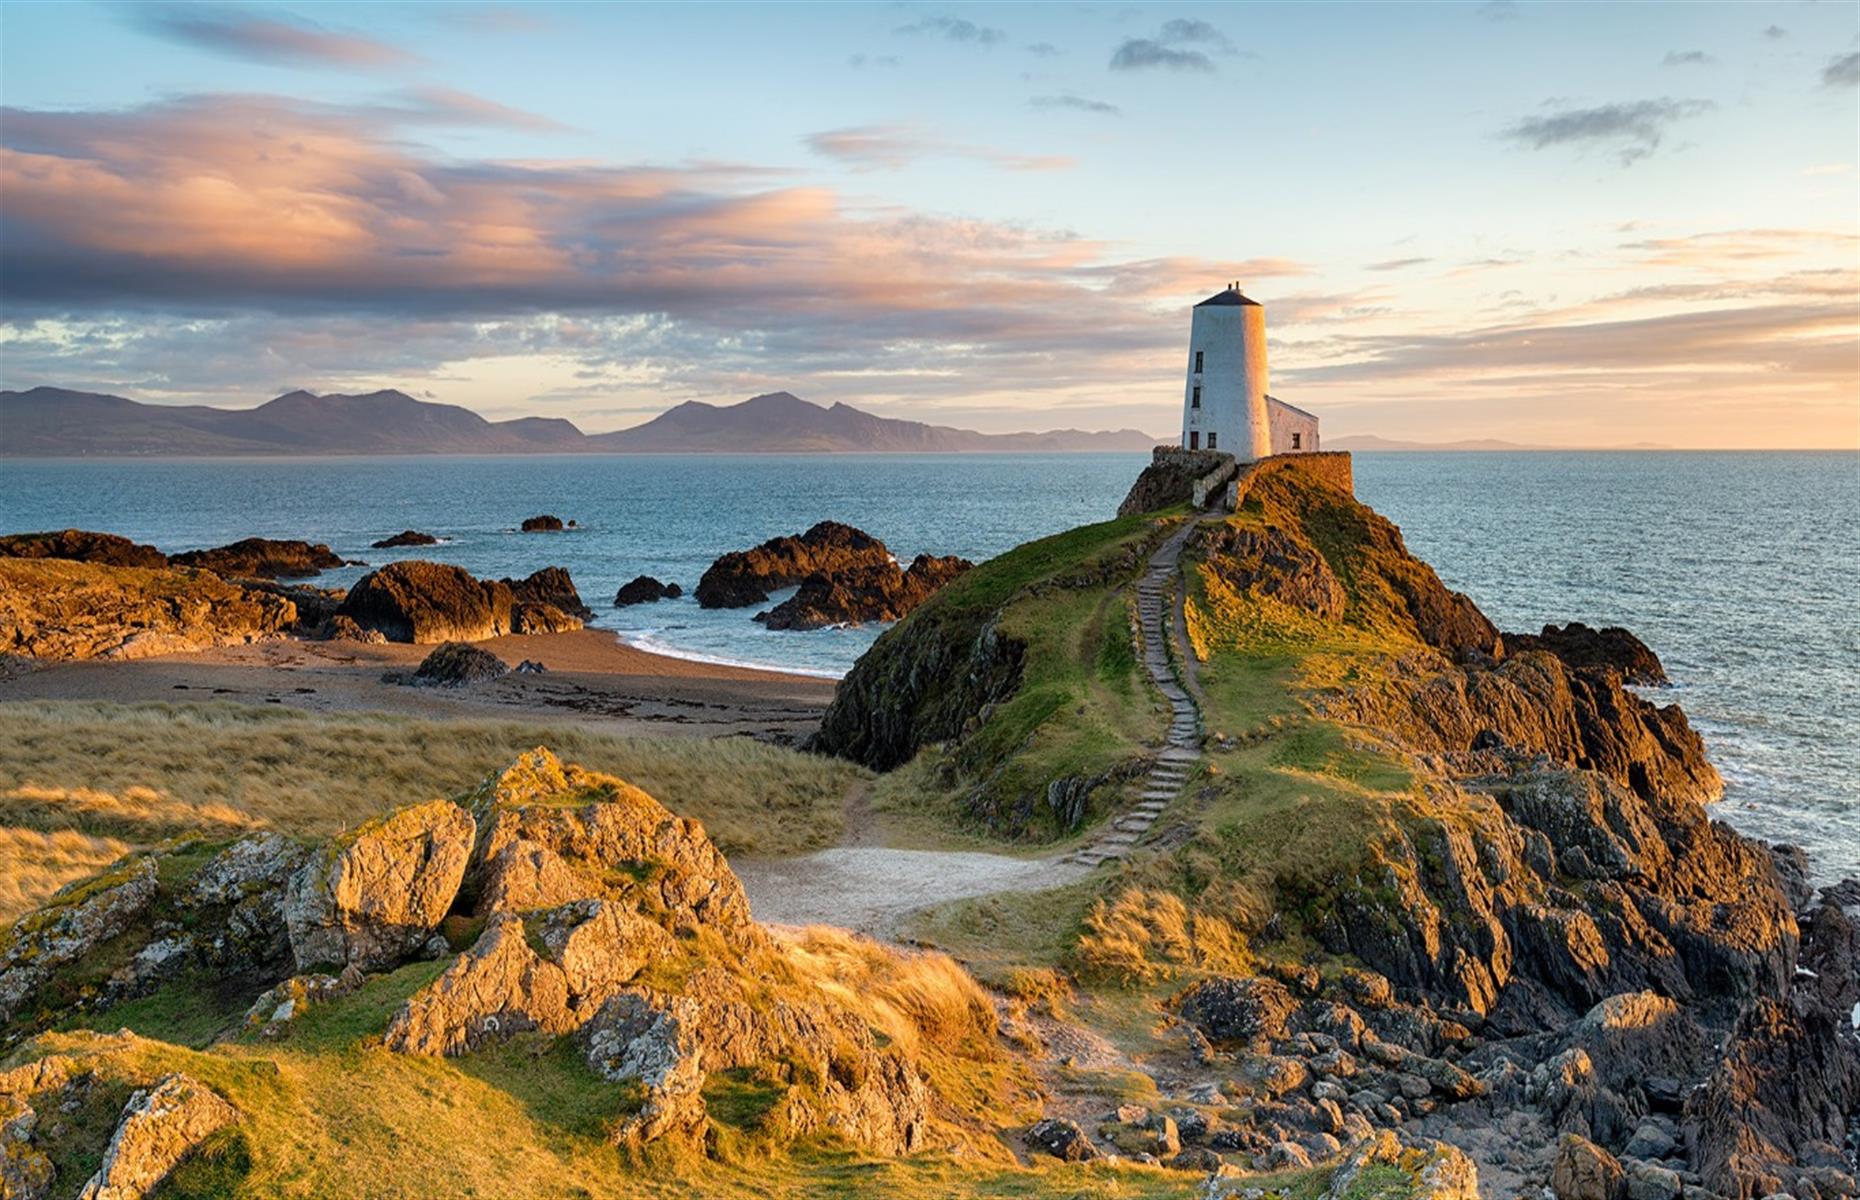 <p>There's no shortage of idiosyncrasies in Britain. But once you've understood the quirks, you can fully enjoy what these beautiful isles have to offer. For everything you need to know, read <a href="https://www.loveexploring.com/guides/72645/best-of-britain-travel-in-england-scotland-wales">our handy guide to the best of Britain</a>. </p>  <p><a href="https://www.loveexploring.com/gallerylist/156070/the-crown-these-glamorous-filming-locations-stood-in-for-royal-palaces"><strong>Now take a look at <em>The Crown</em>'s glamorous filming locations that stood in for royal palaces</strong></a></p>